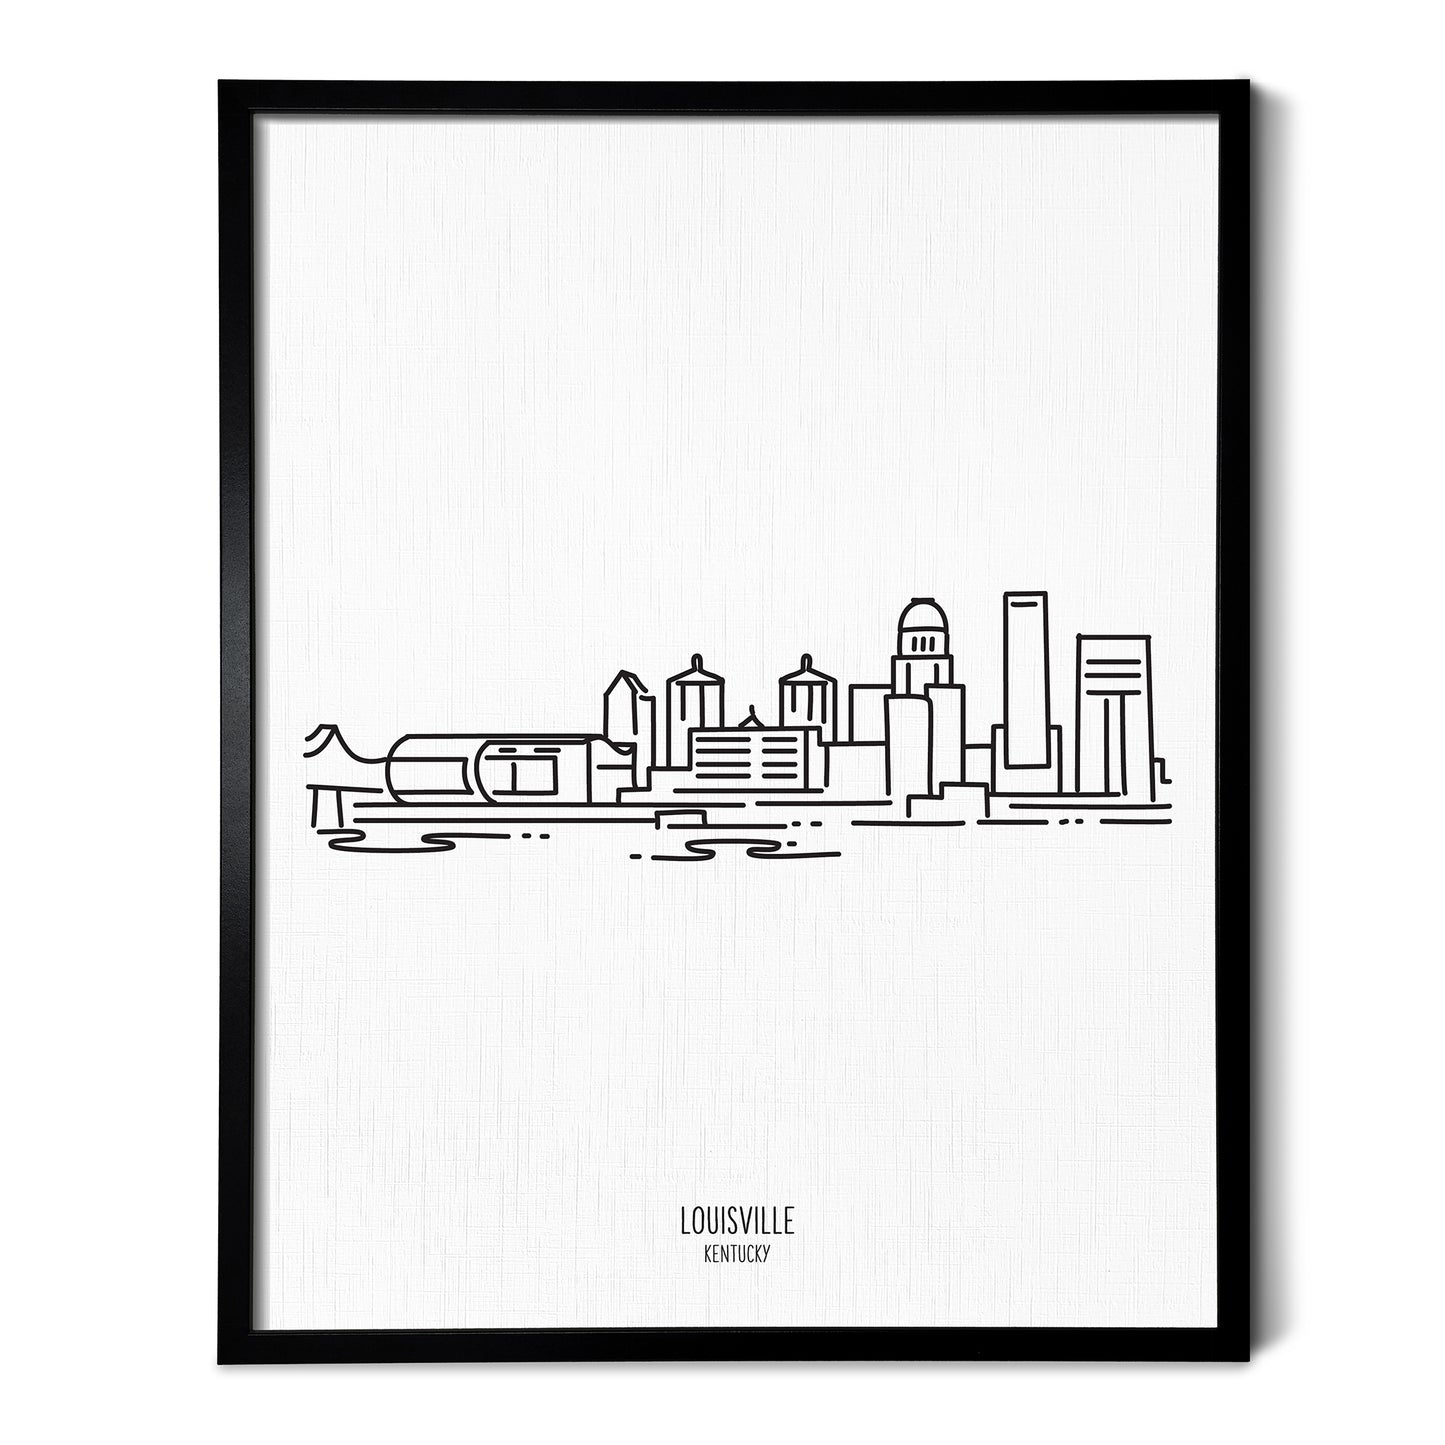 A line art drawing of the Louisville Kentucky Skyline on white linen paper in a thin black picture frame